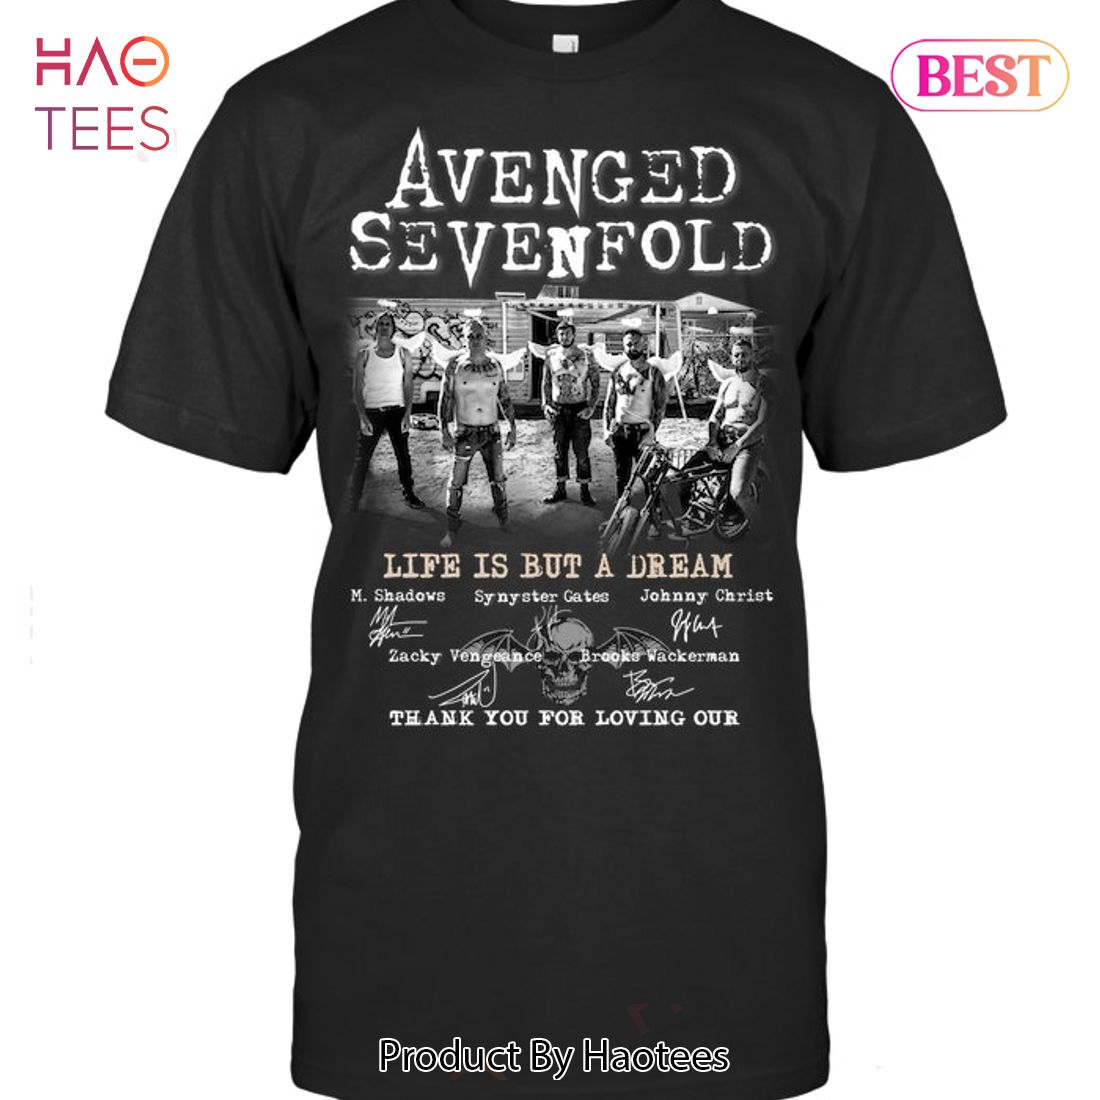 Avenged Sevenfold - Afterlife All-Over T-Shirt